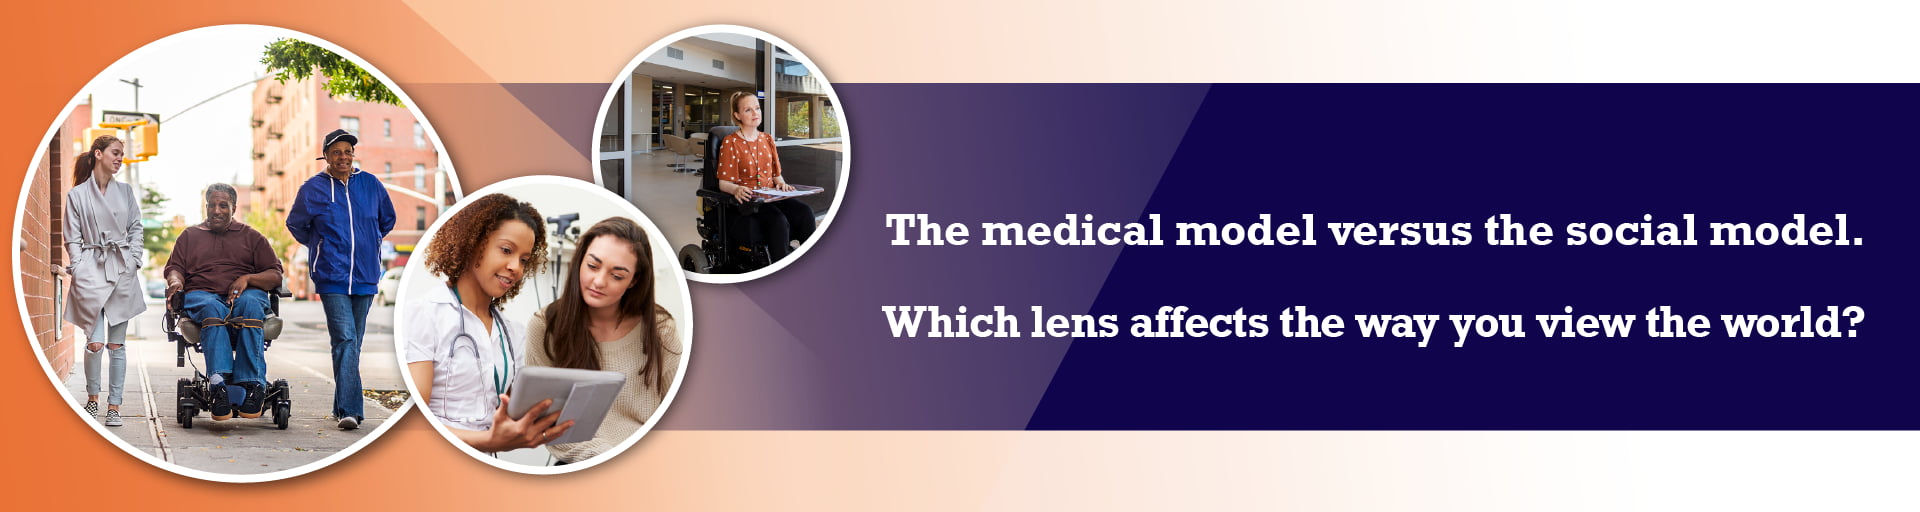 The medical model versus the social model. Which lens affects the way you view the world?